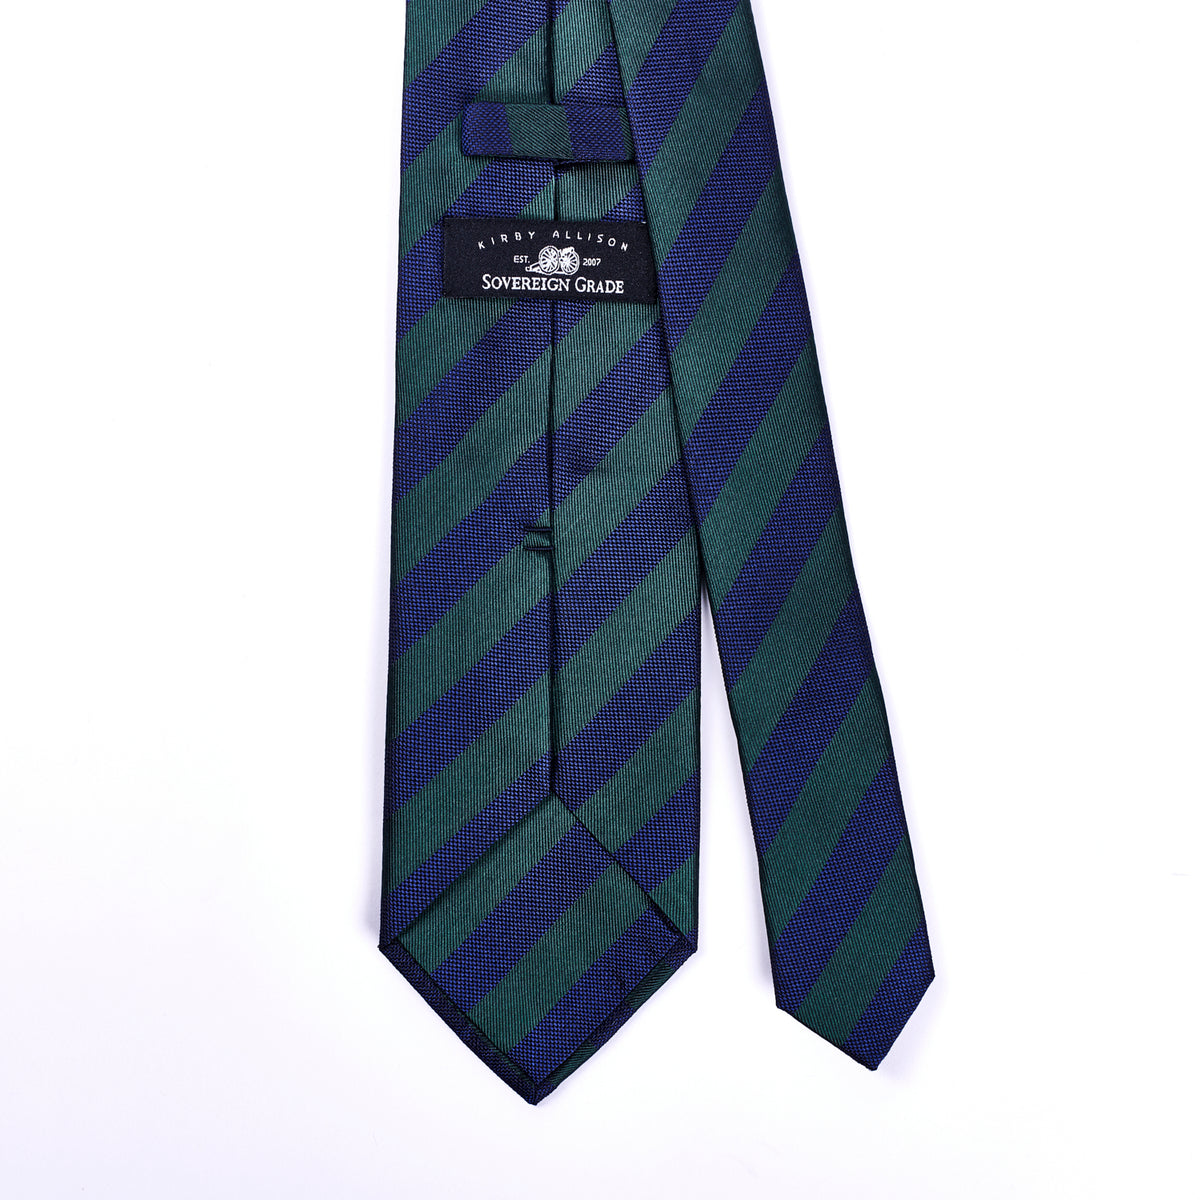 A high-quality Sovereign Grade Woven Navy and Green Rep Tie, 150 cm on a white background from KirbyAllison.com.